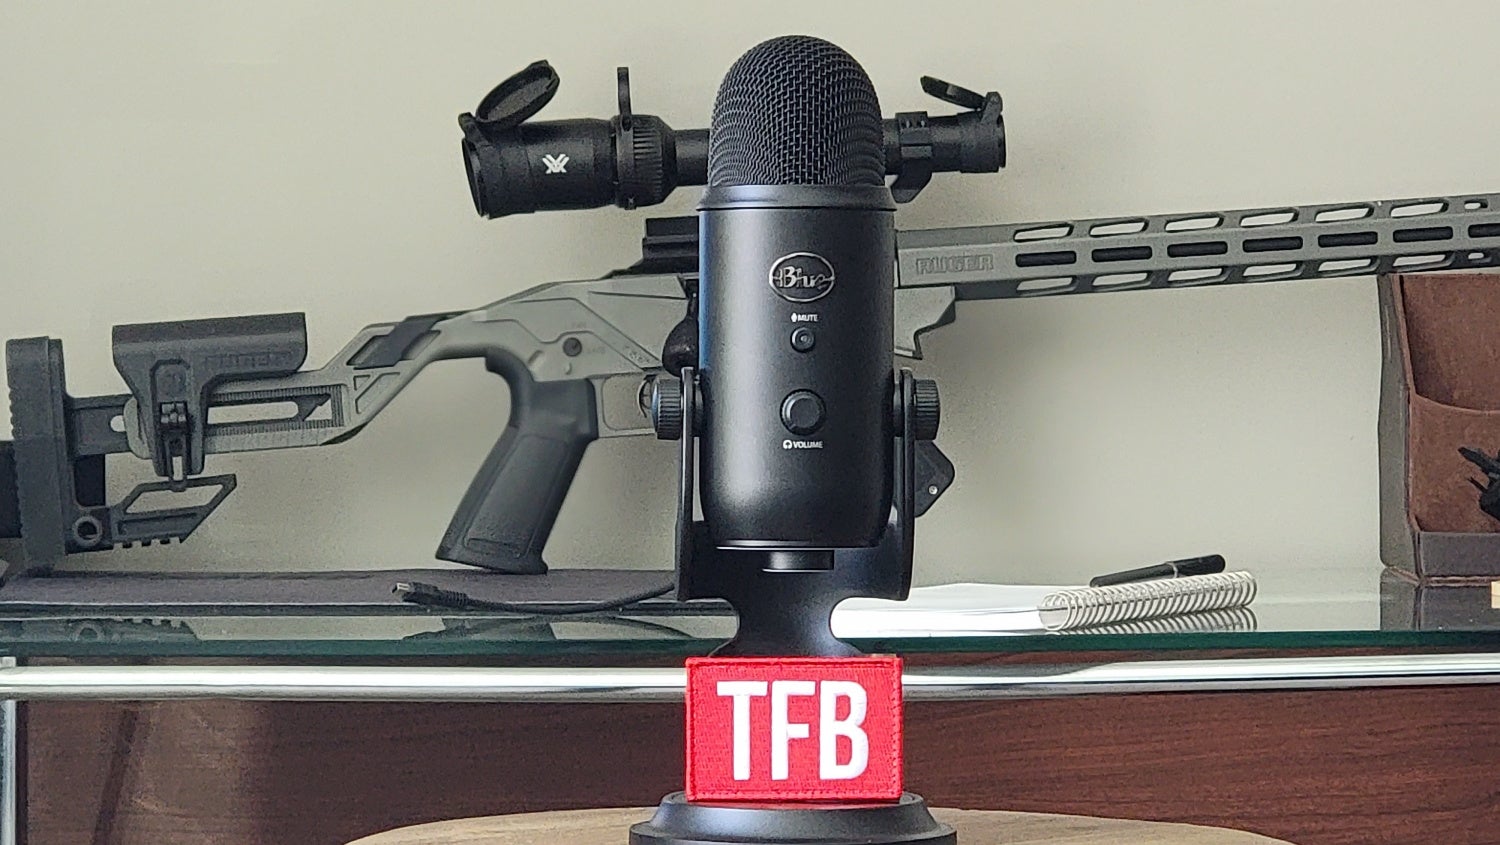 TFB Podcast Roundup 79: Some Podcasts to Cure Your Hangover